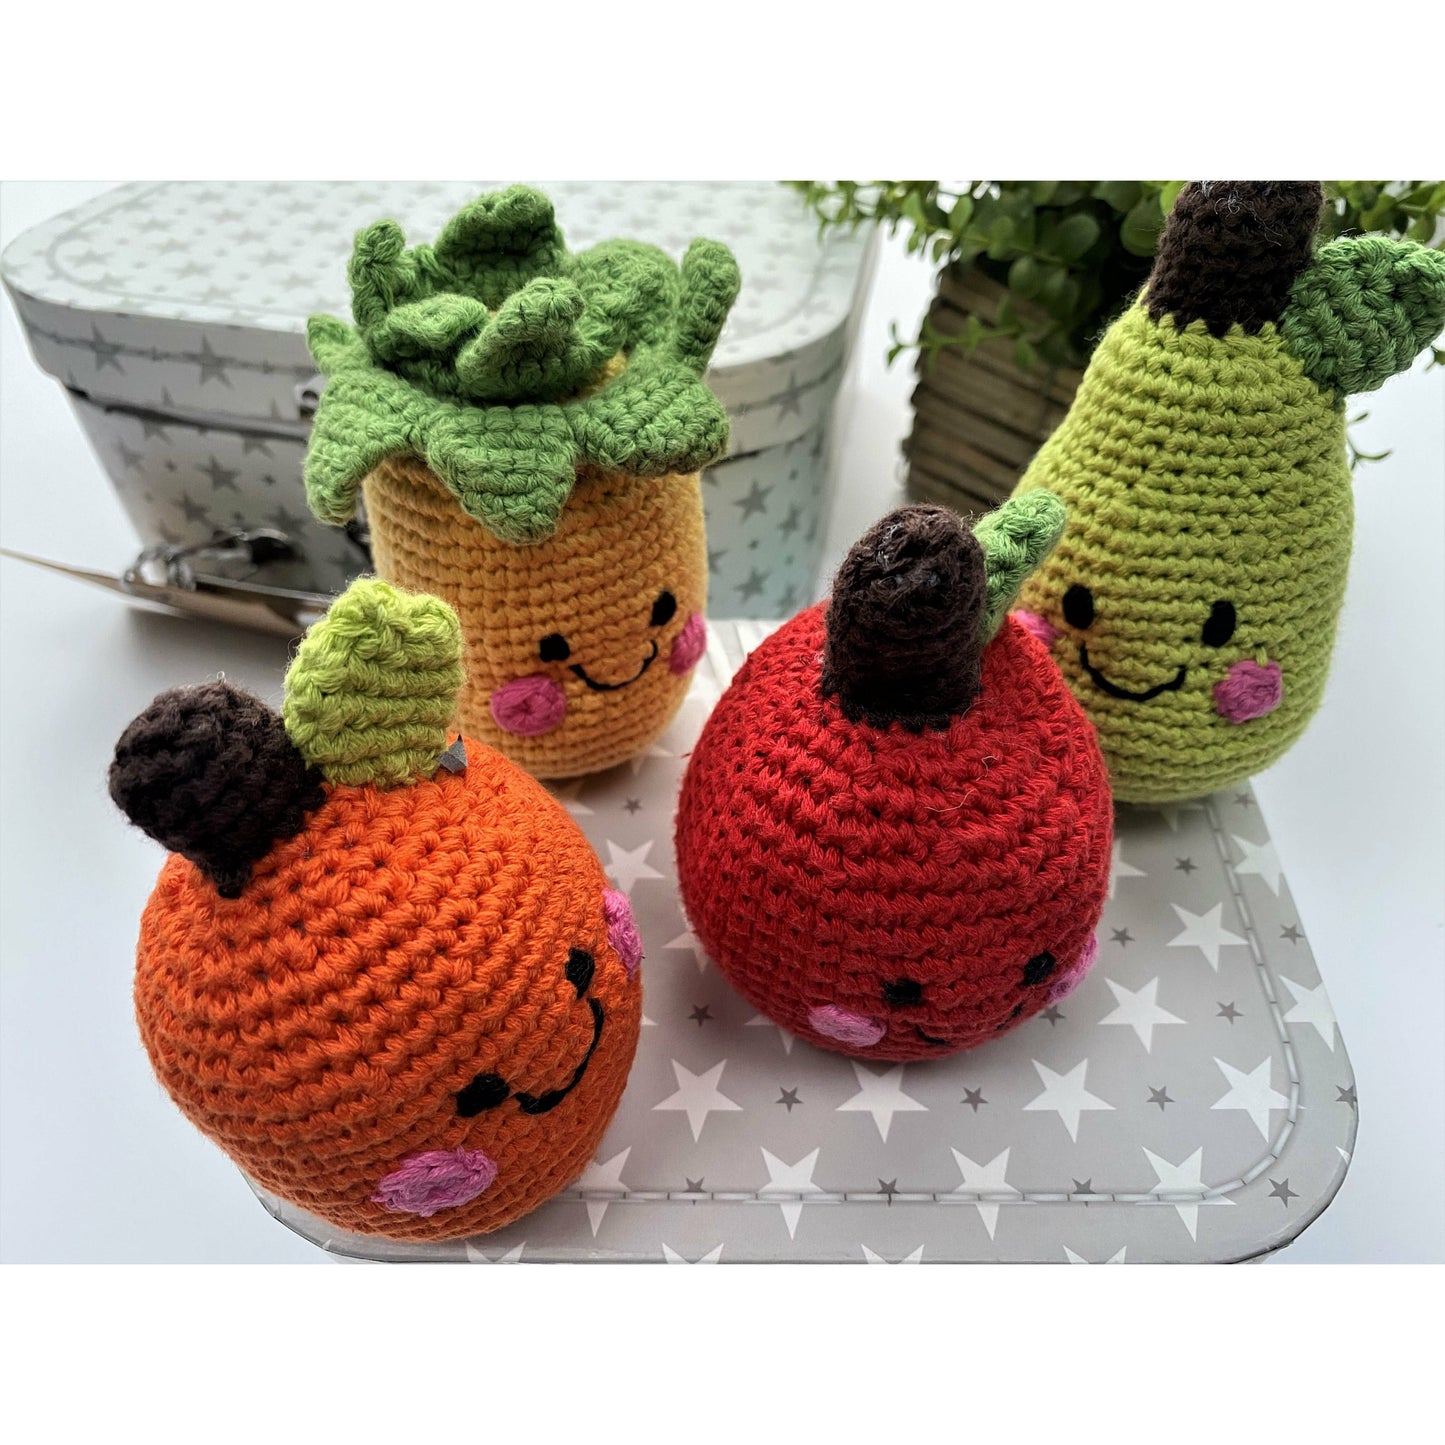 Eco Friendly Unisex New Baby Gifts, Cute Fruit Rattles Hamper, Fairtrade Baby Gift, Baby Shower Gift, New Mum Gift, Fairtrade Baby Rattles